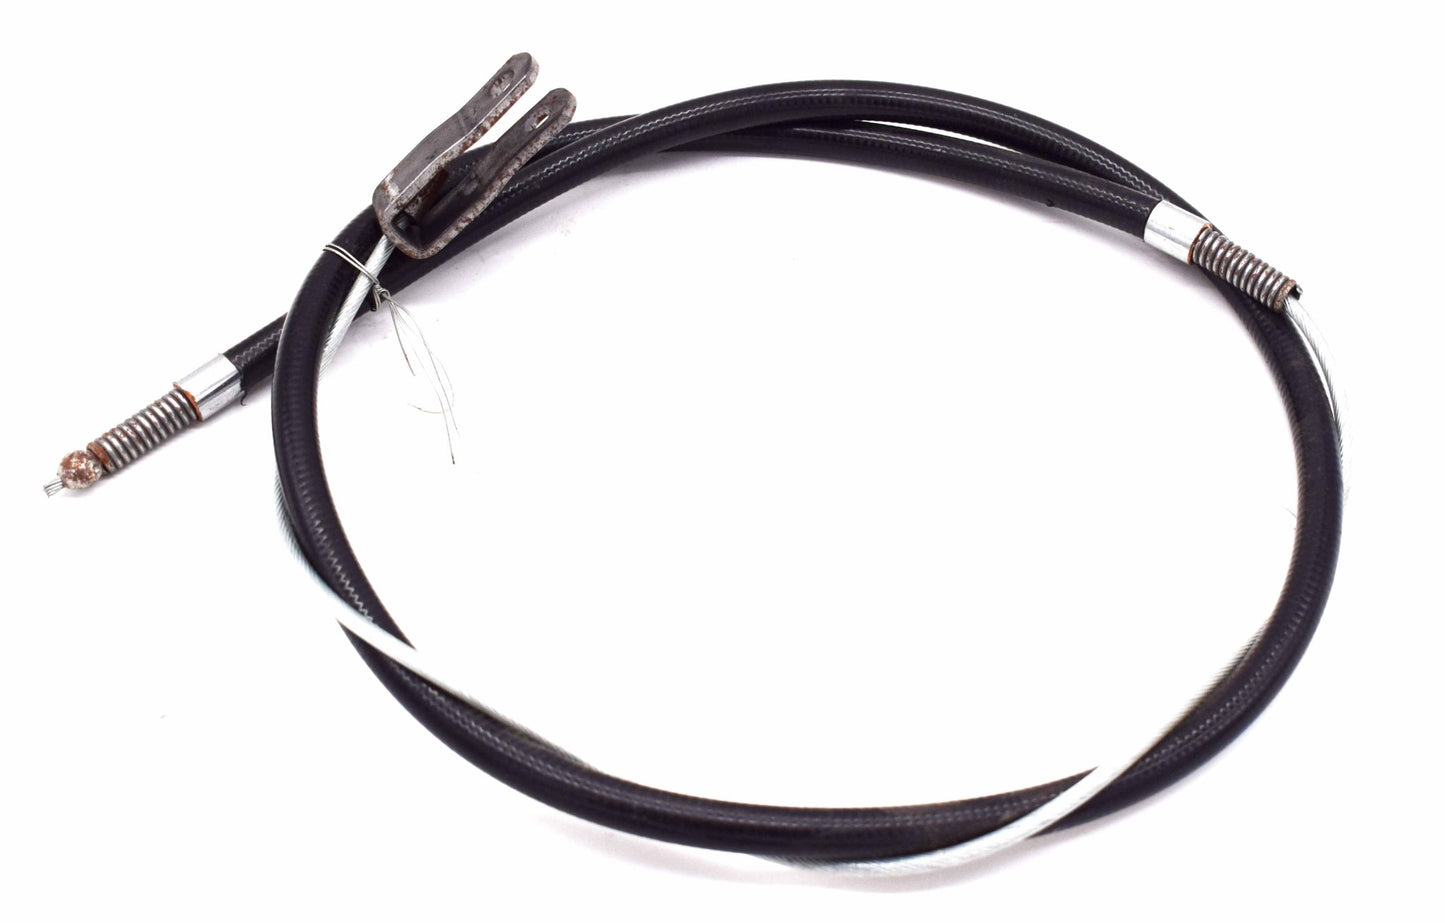 Hand Brake Front Cable & Conduit, 1948-1951, Jeepster - The JeepsterMan